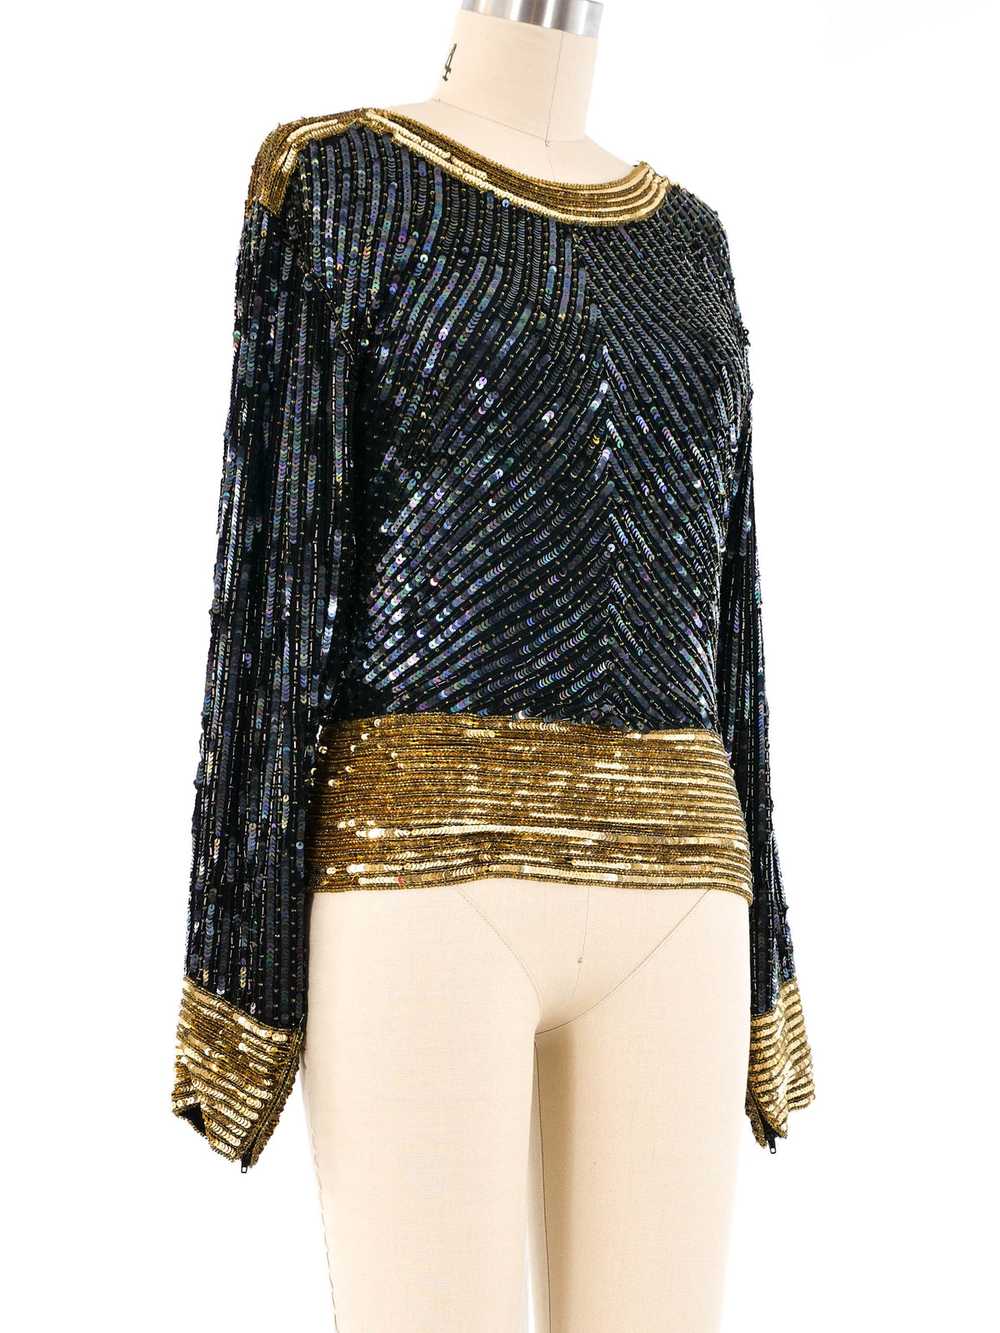 Yves Saint Laurent Black and Gold Sequin Top - image 3